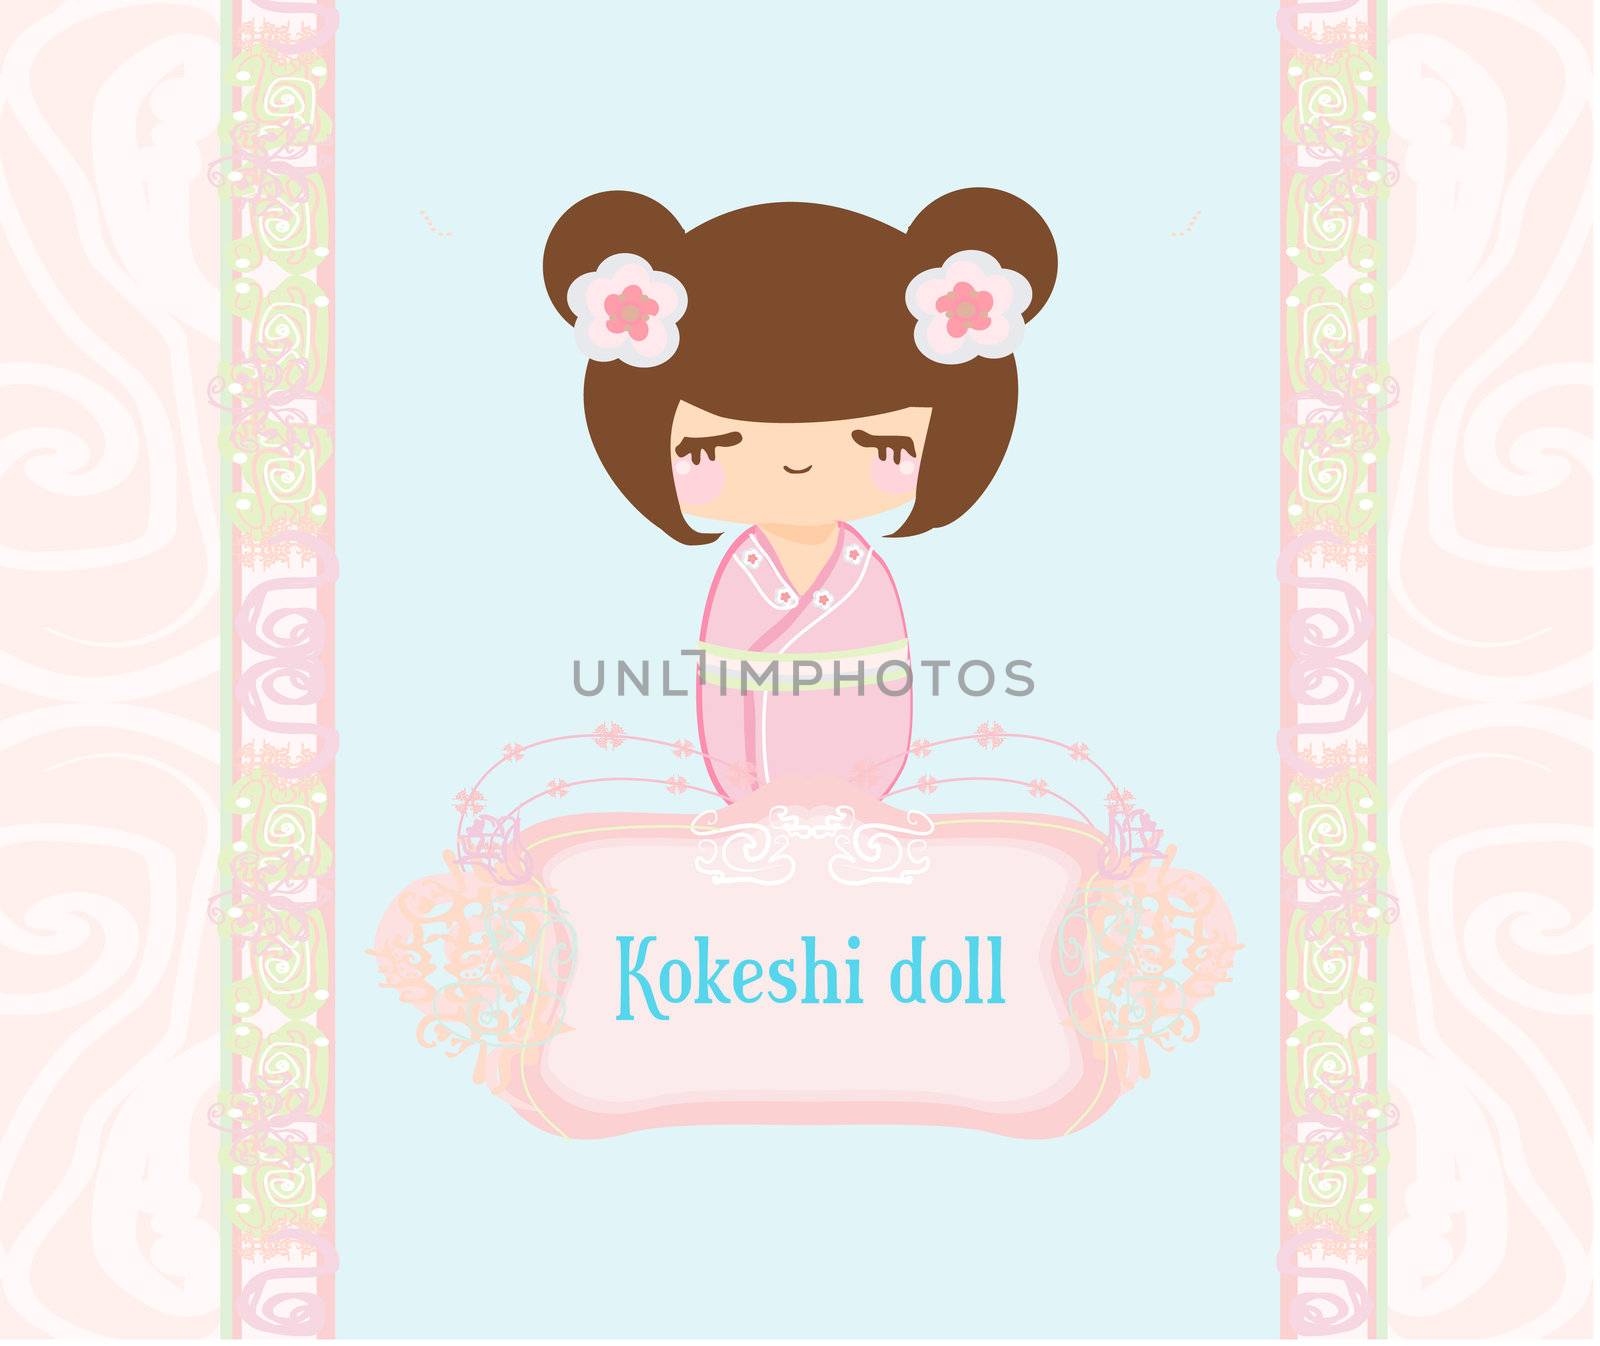 Kokeshi doll on the pink background with floral ornament